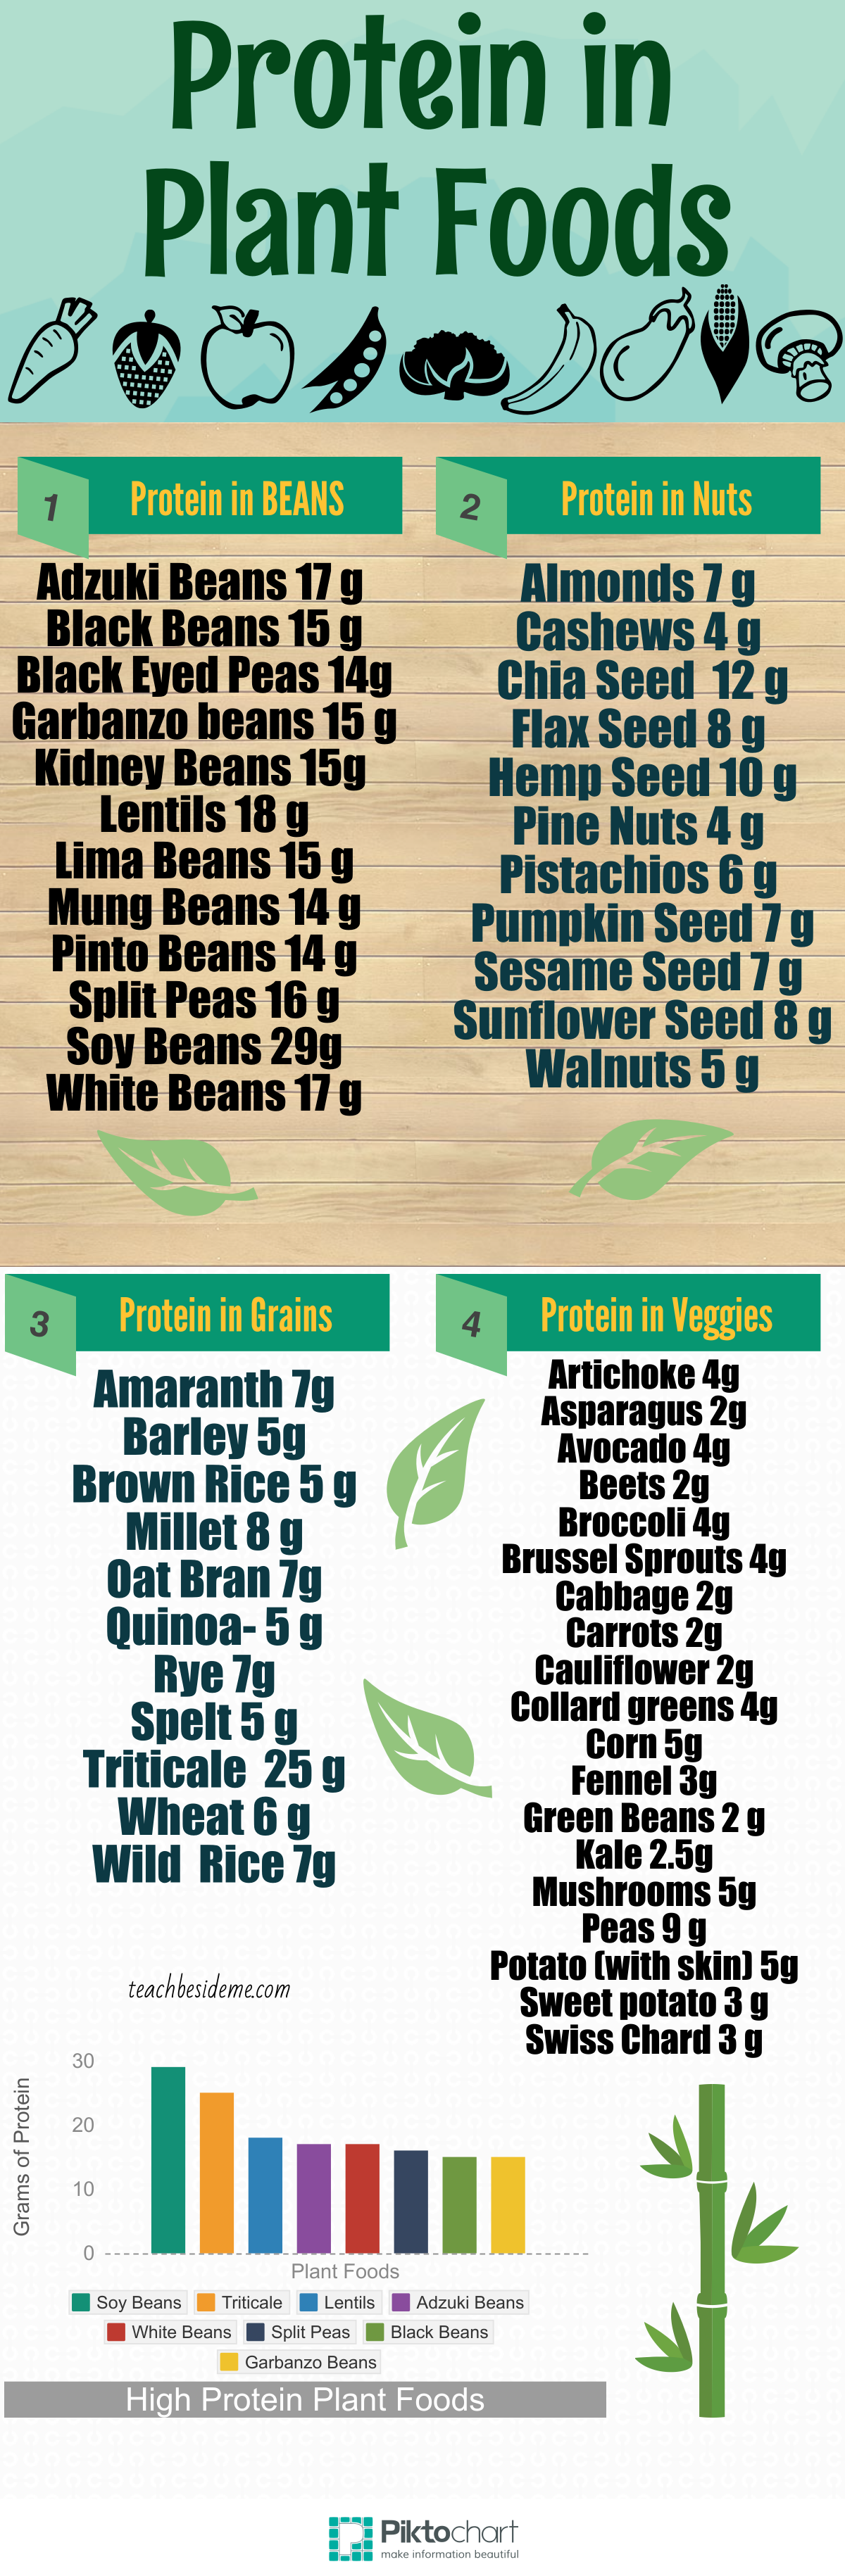 Protein in Plant Foods